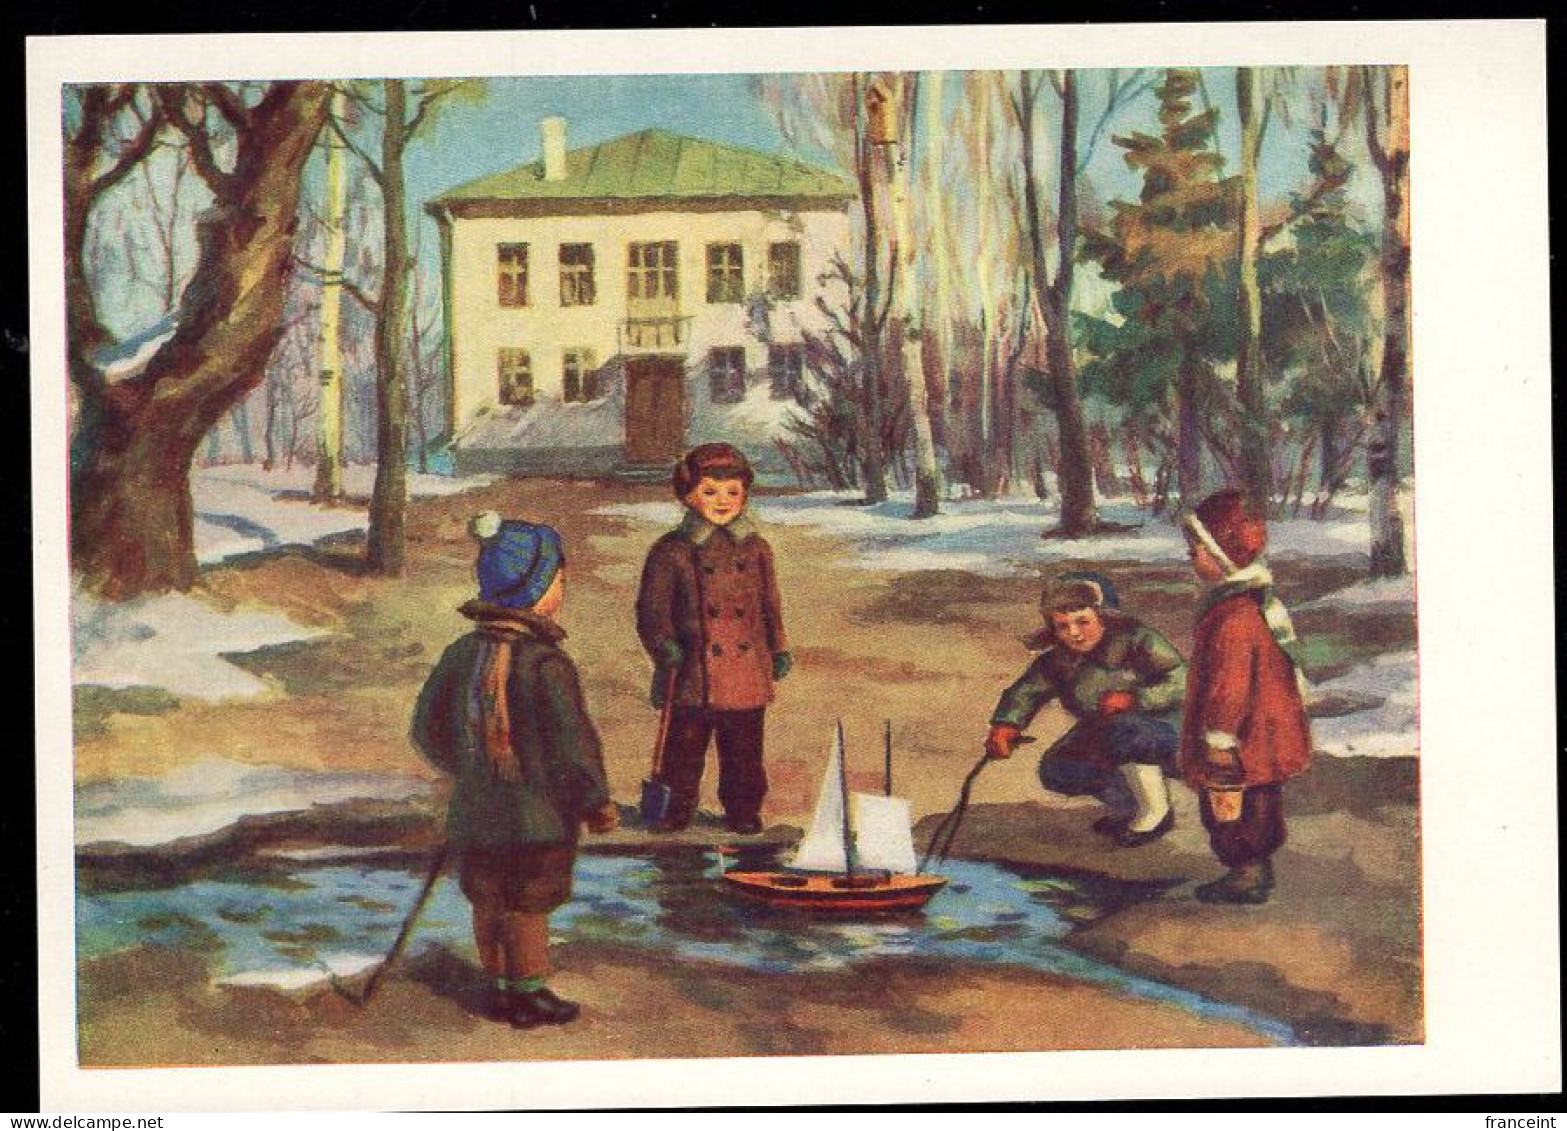 RUSSIA(1959) Youngsters Playing With Toy Sailboat In Puddle. 25 Kop Illustrated Postal Card. - 1950-59